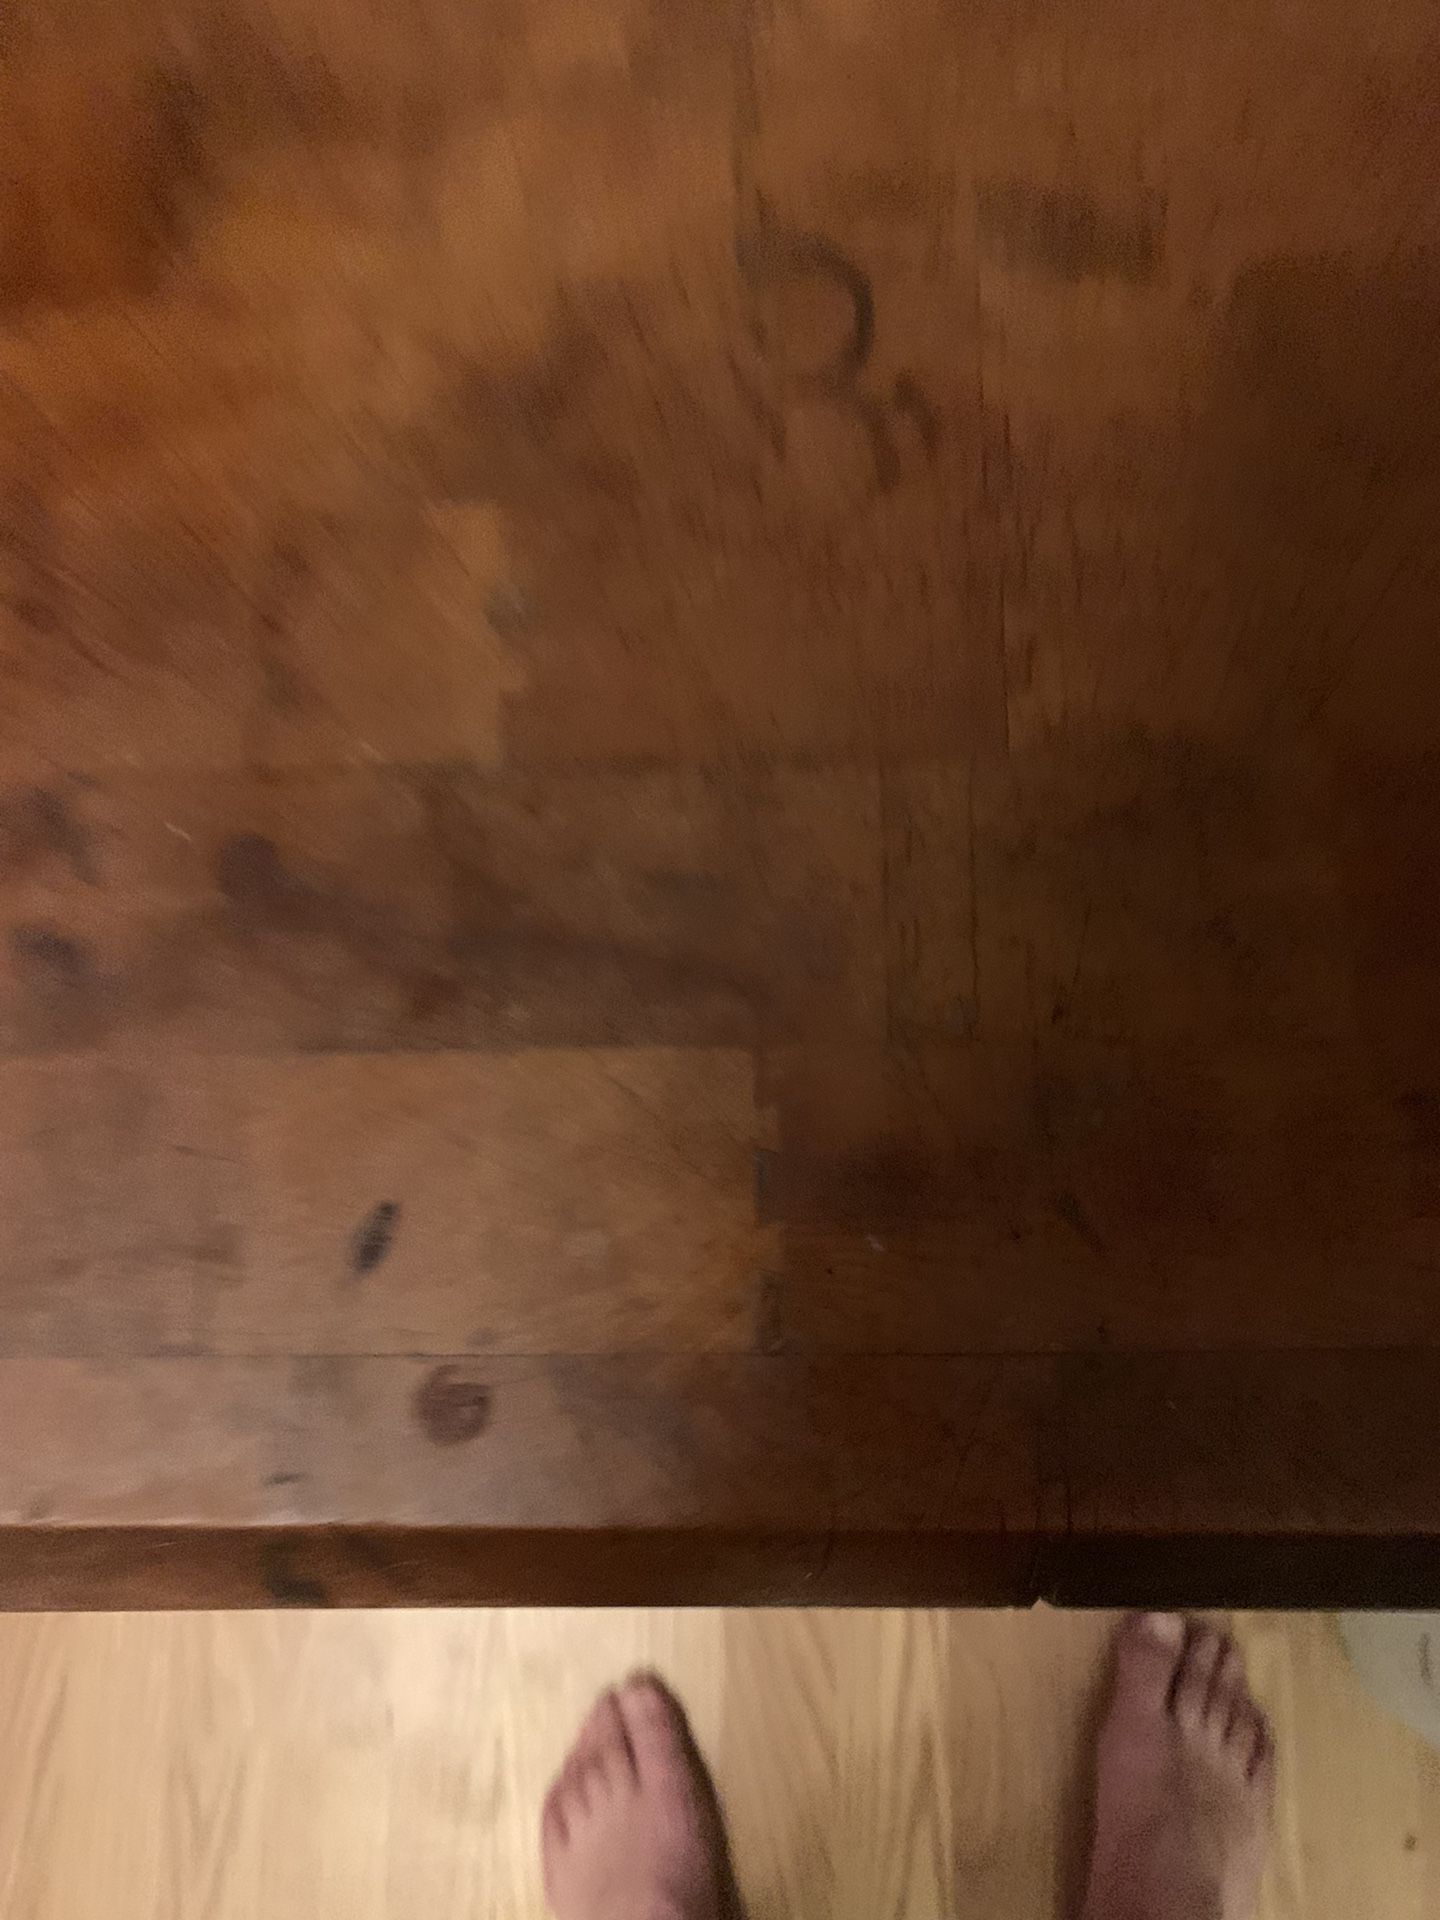 Old Butcher Block From The Late 1800 -early1900 18”x18” 91/2”thick 20”legs The Block Is Dovetailed Together $3500 OBO